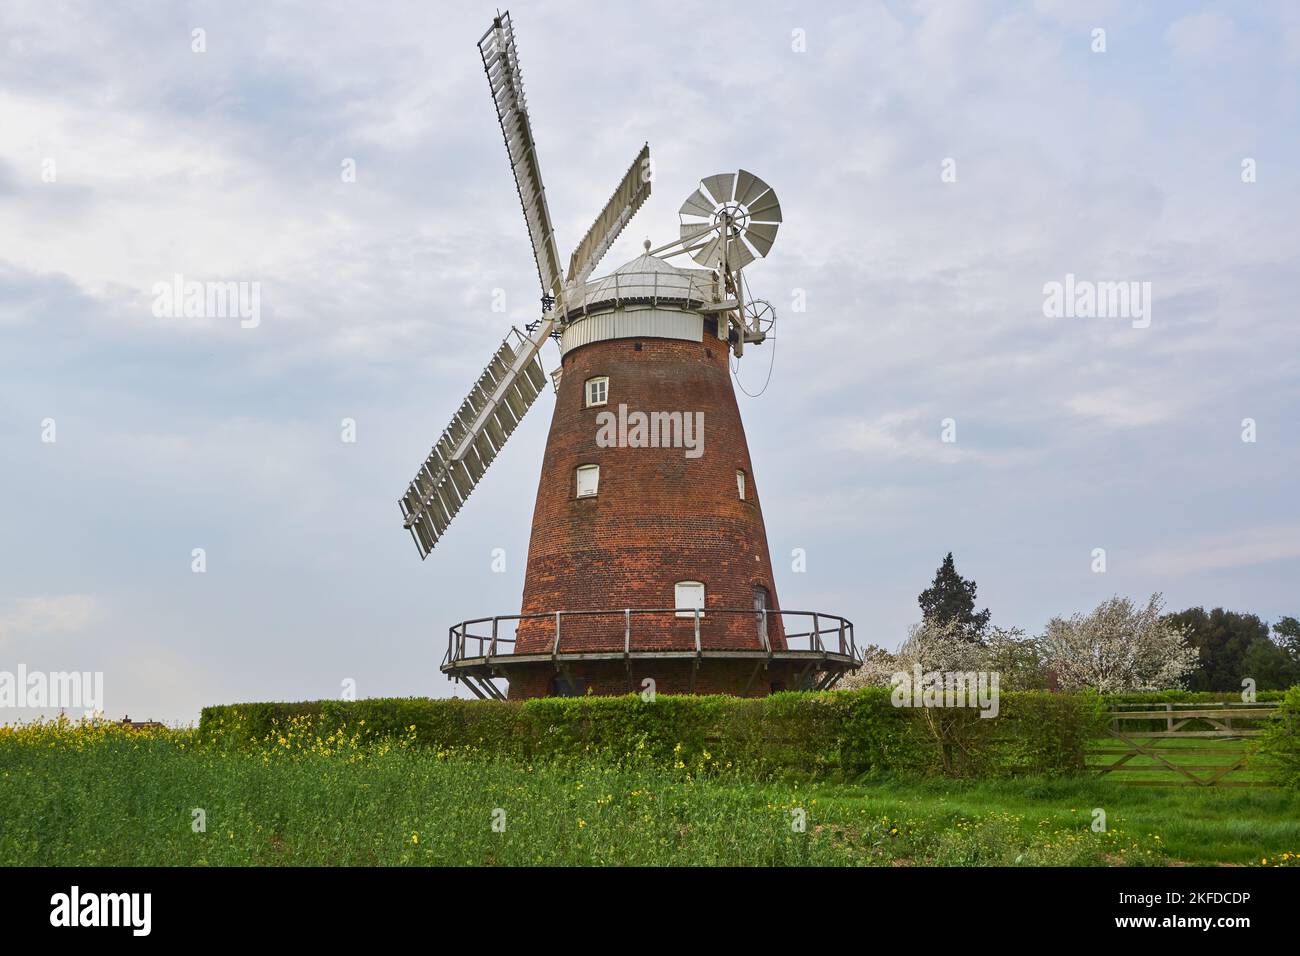 John Webb's Windmill or Lowe’s Mill at Thaxted, Essex UK in the English countryside Stock Photo